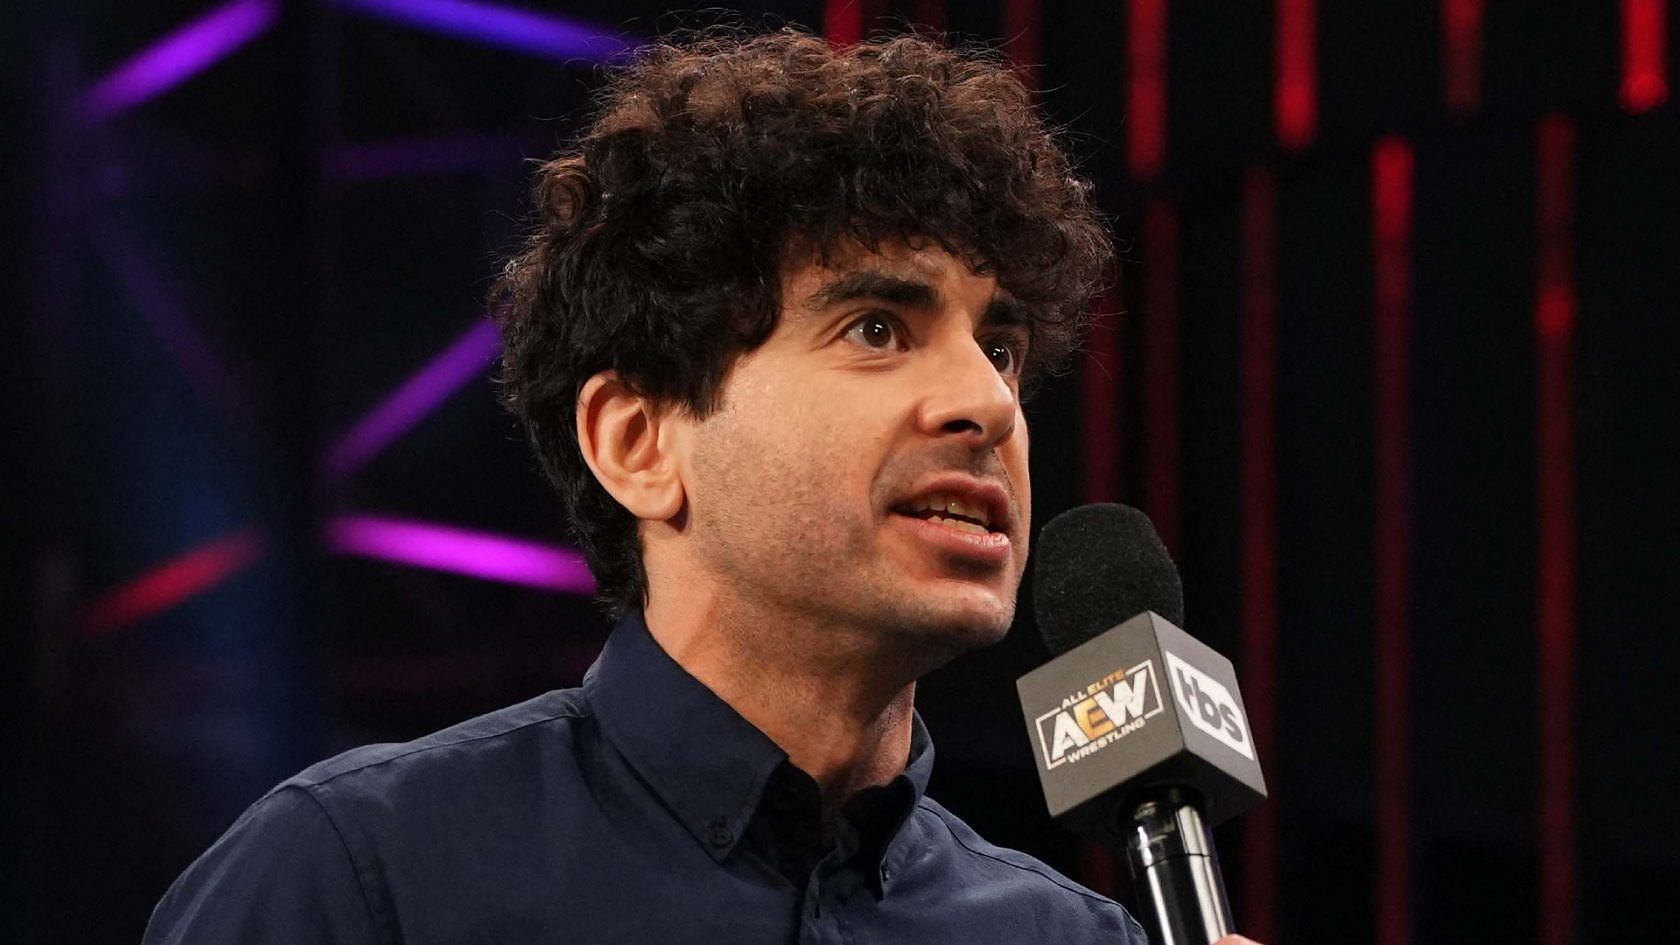 Tony Khan announces a debut of famous TV personality